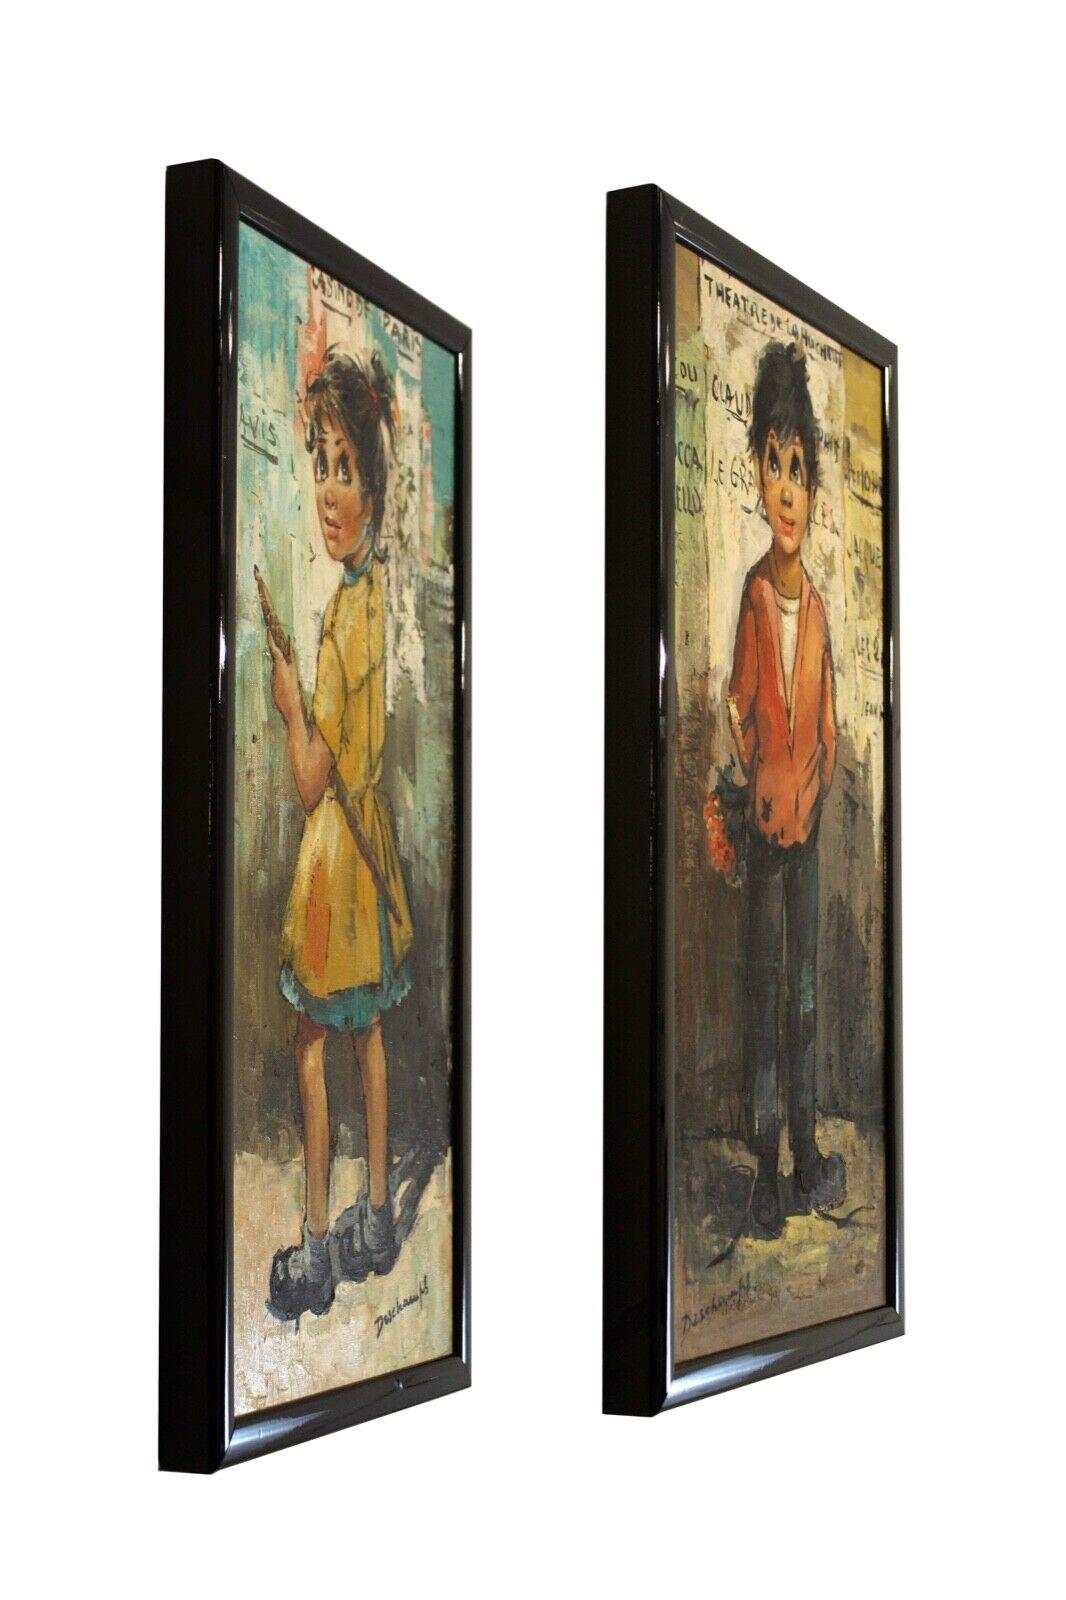 We are offering in Michigan this enduring pair of Mid Century Modern inspired oil paintings on canvas depicting two big eyed children on the streets in France by Monsieur L. Deschamps. Signed on the bottom left and right. Dimensions: 13.5